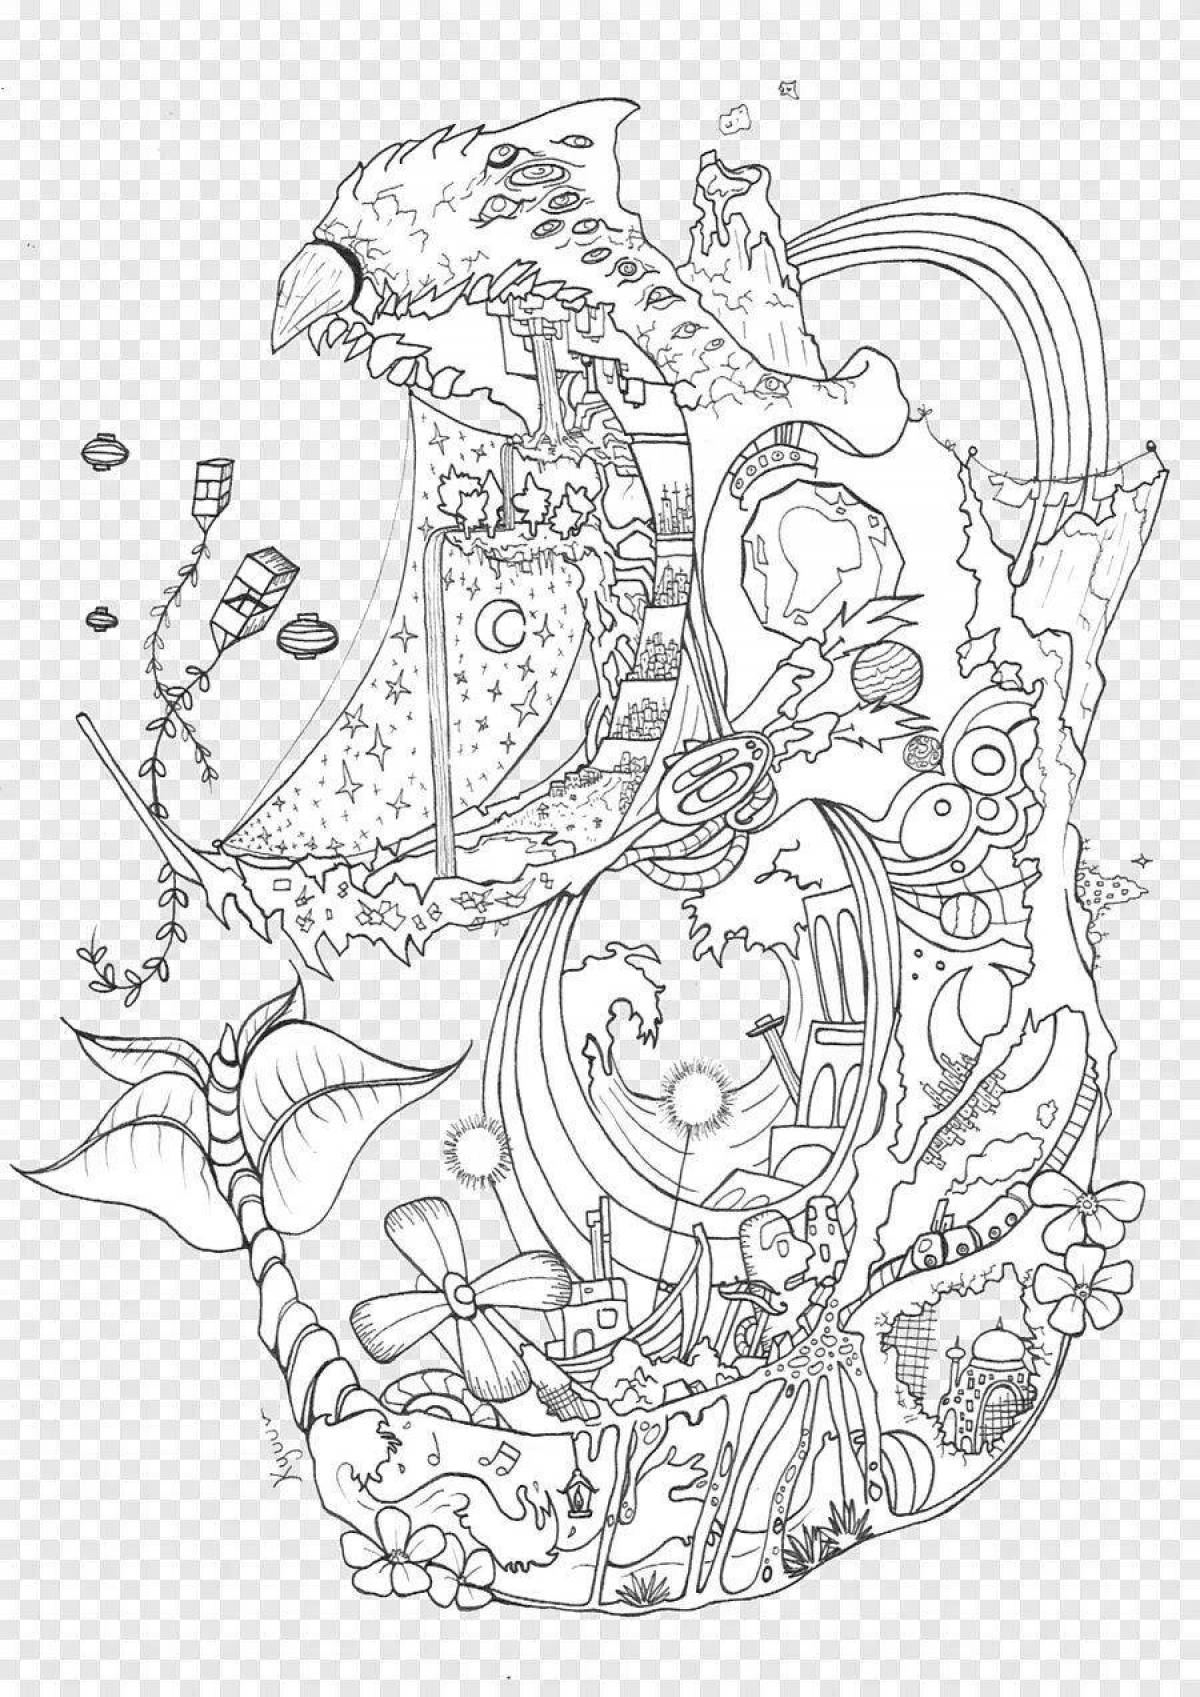 Glamorous howl's moving castle anime coloring book